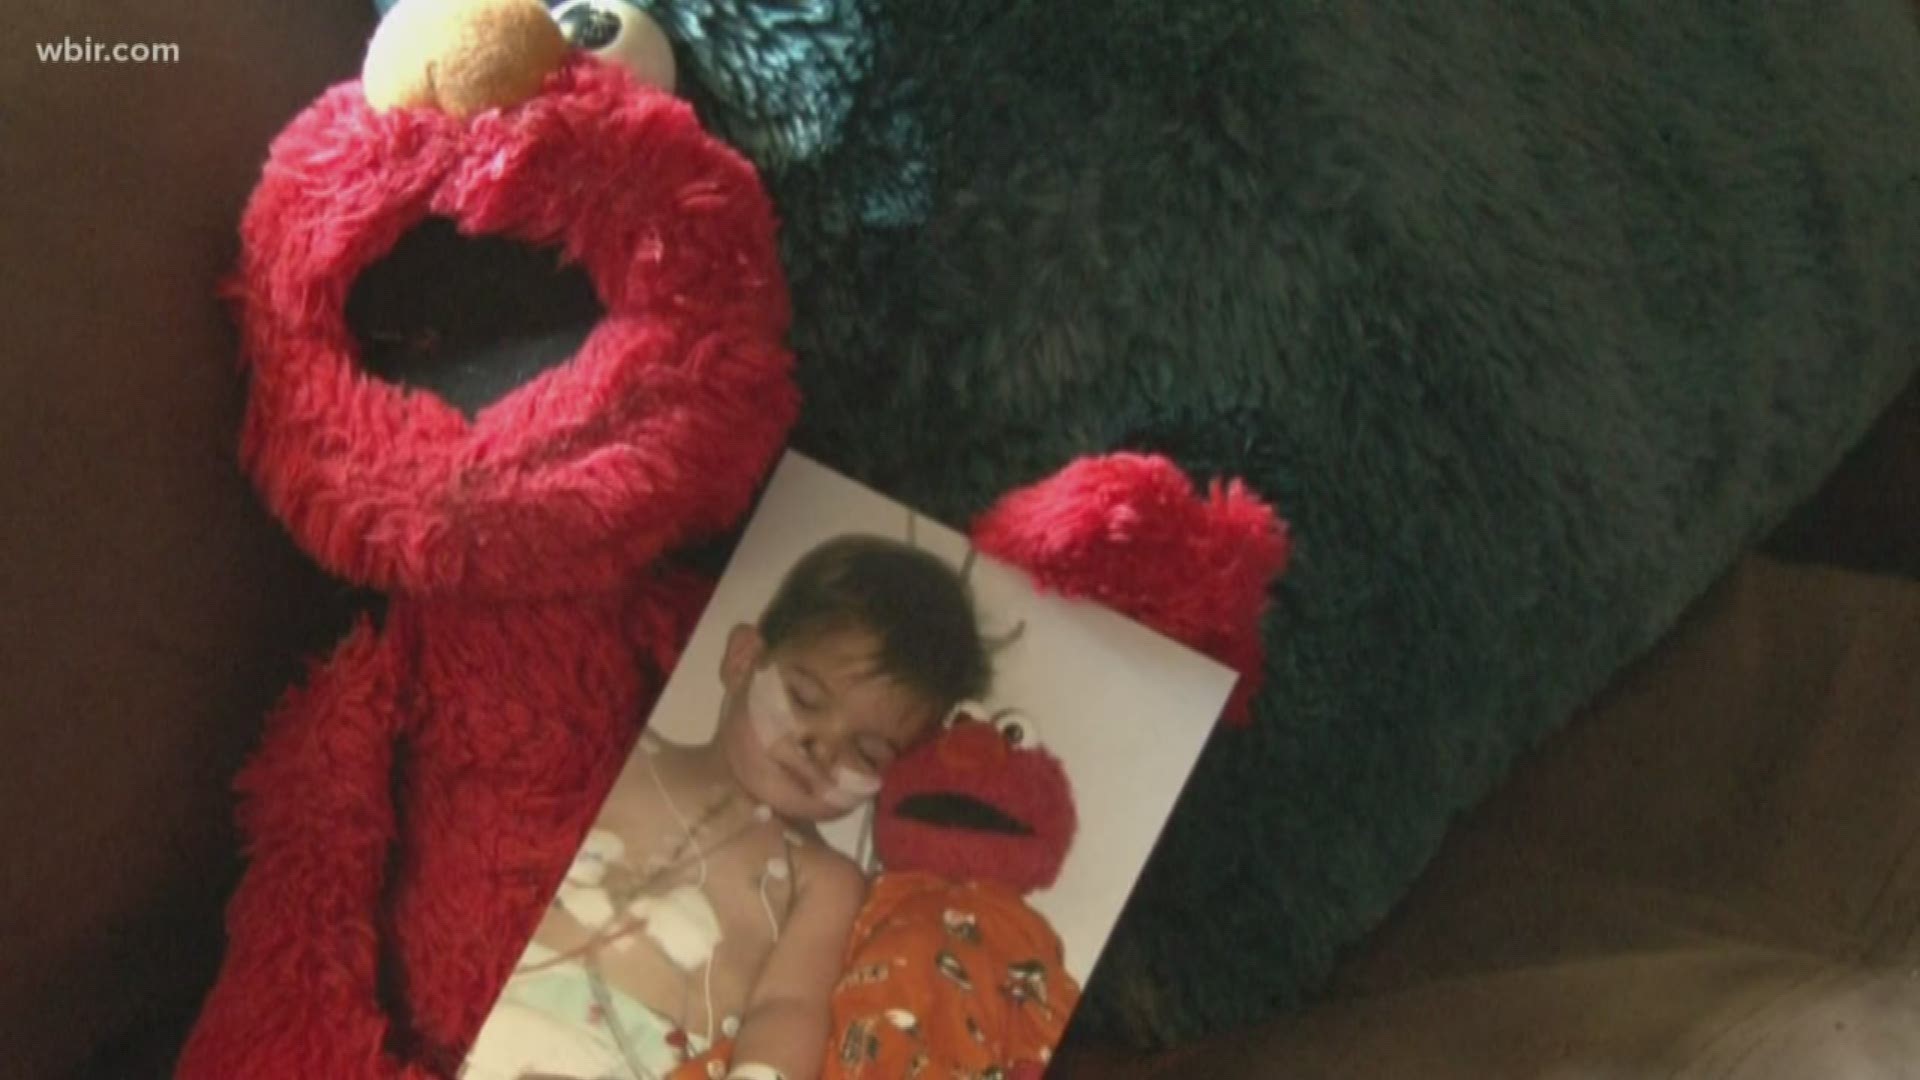 The photographer, Megan Flanagan, returned Elmo to his mom's hands the day before what would have been Tucker's 14th birthday.